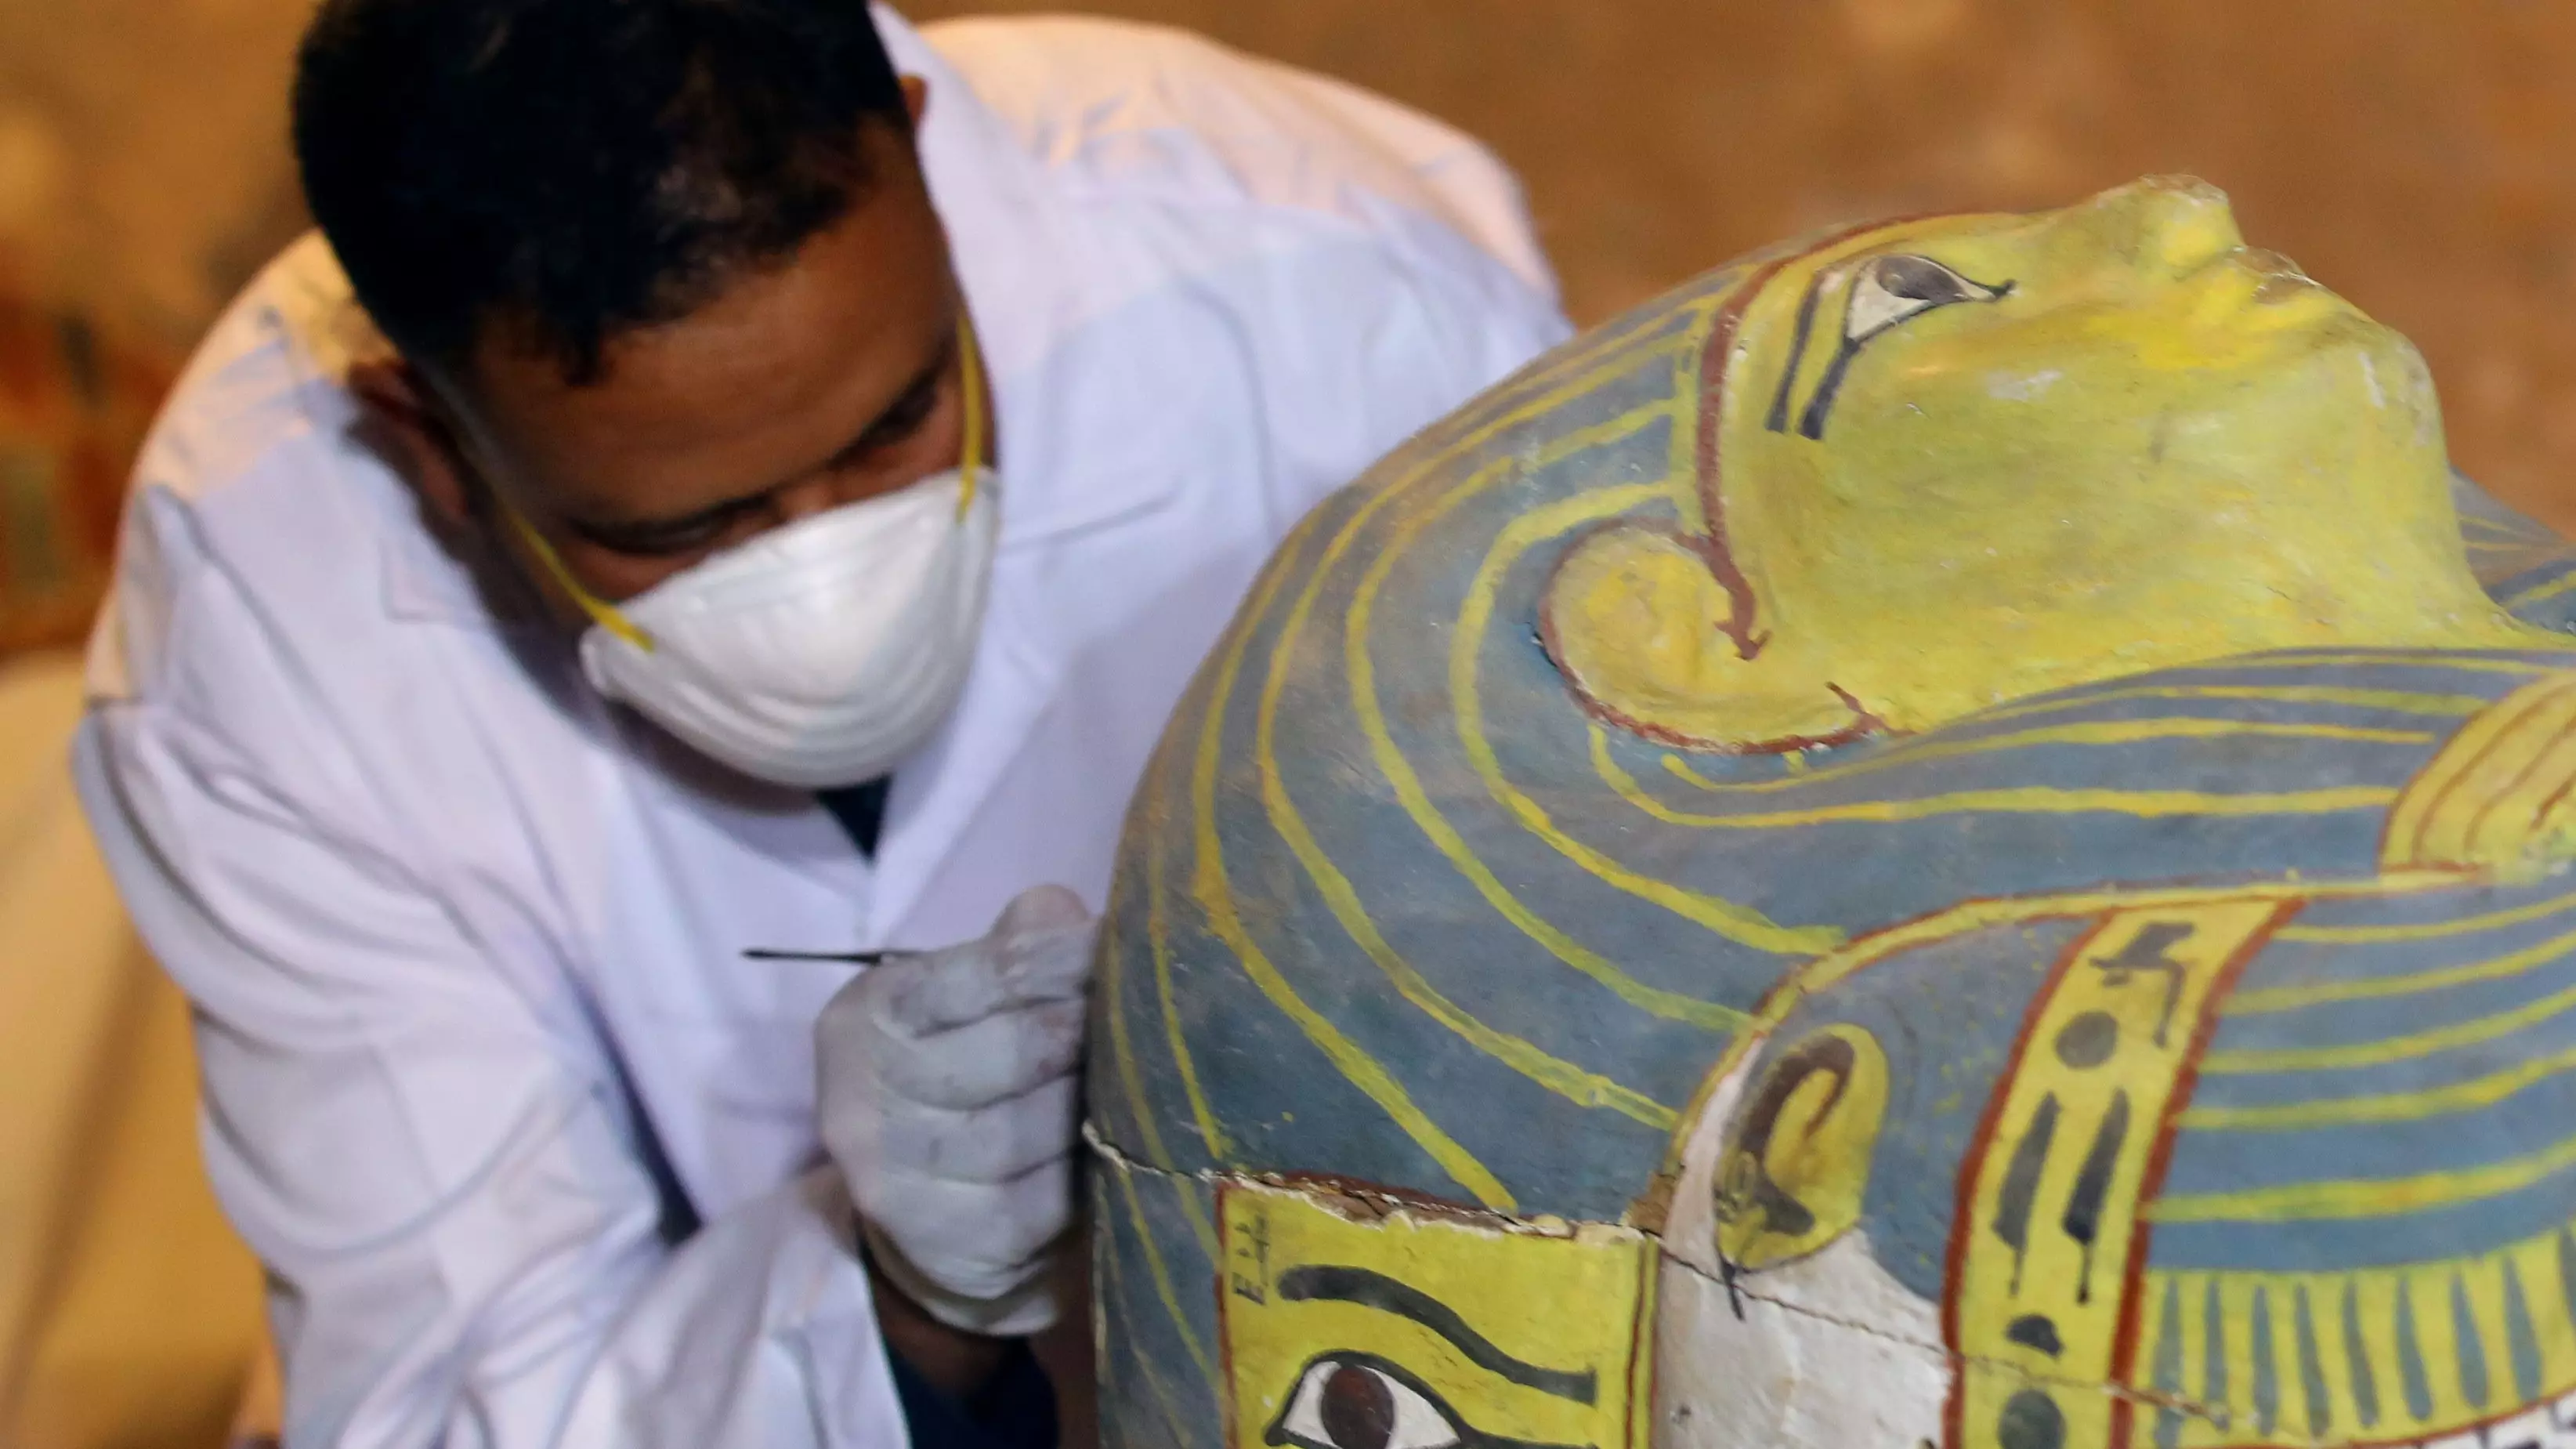 Mummy Of 3,000 Year Old Woman Found Perfectly Preserved In Egypt Coffin